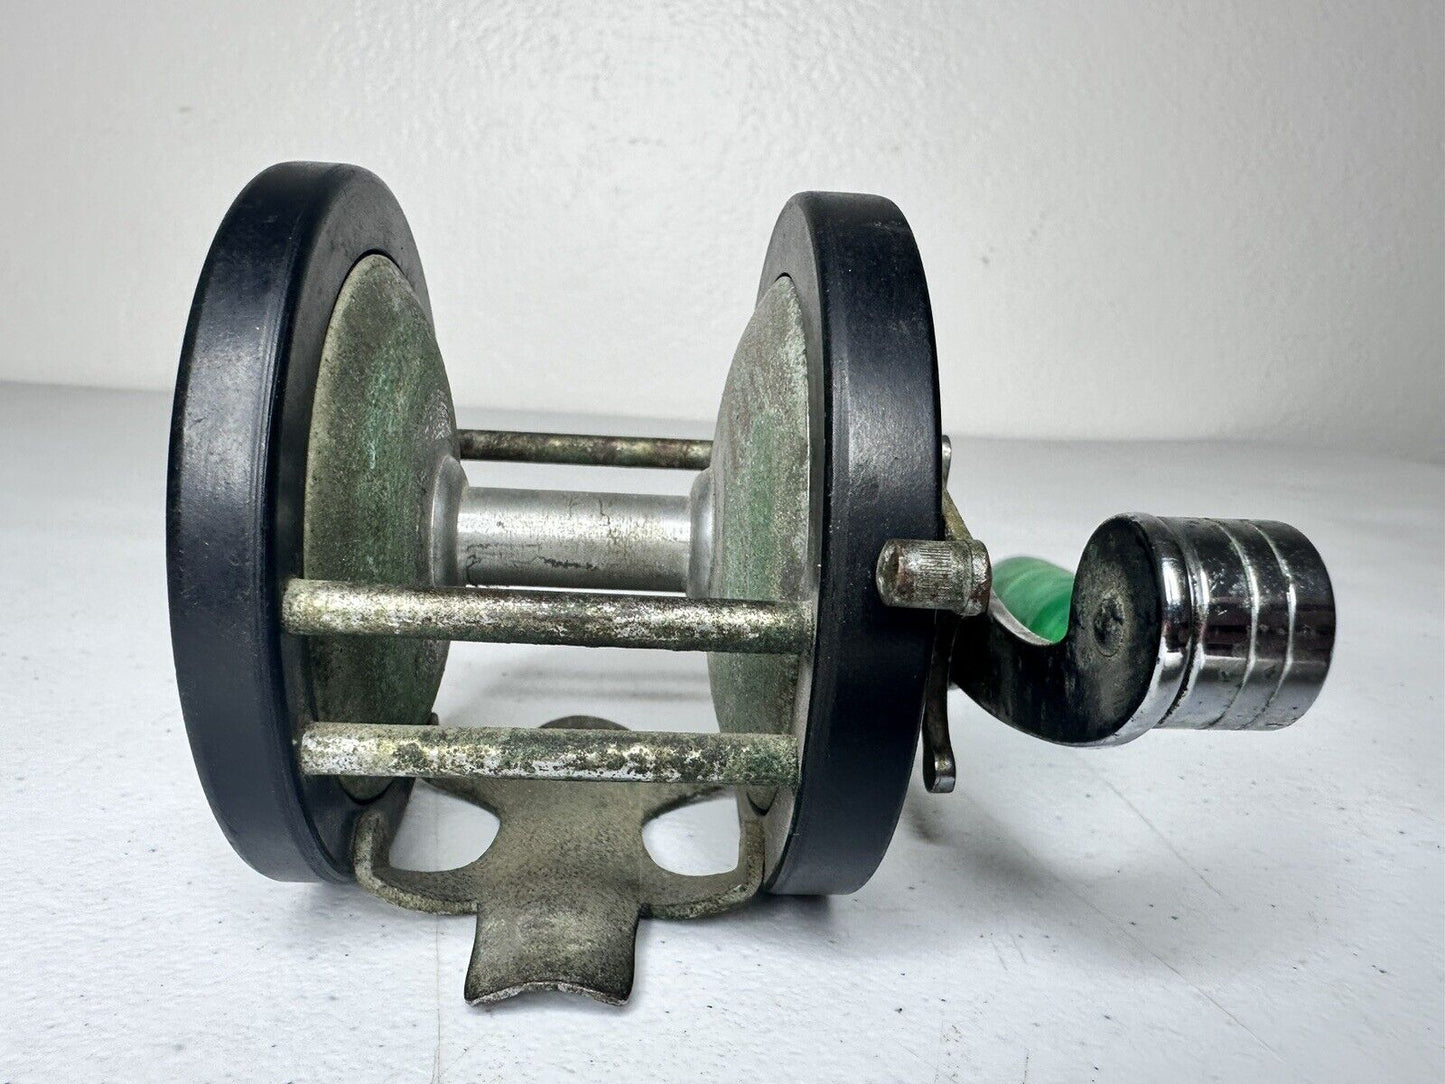 Vintage 1930s-40s Penn Bayhead Fishing Reel - High-Durability, Collectible Angling Gear - TreasuTiques